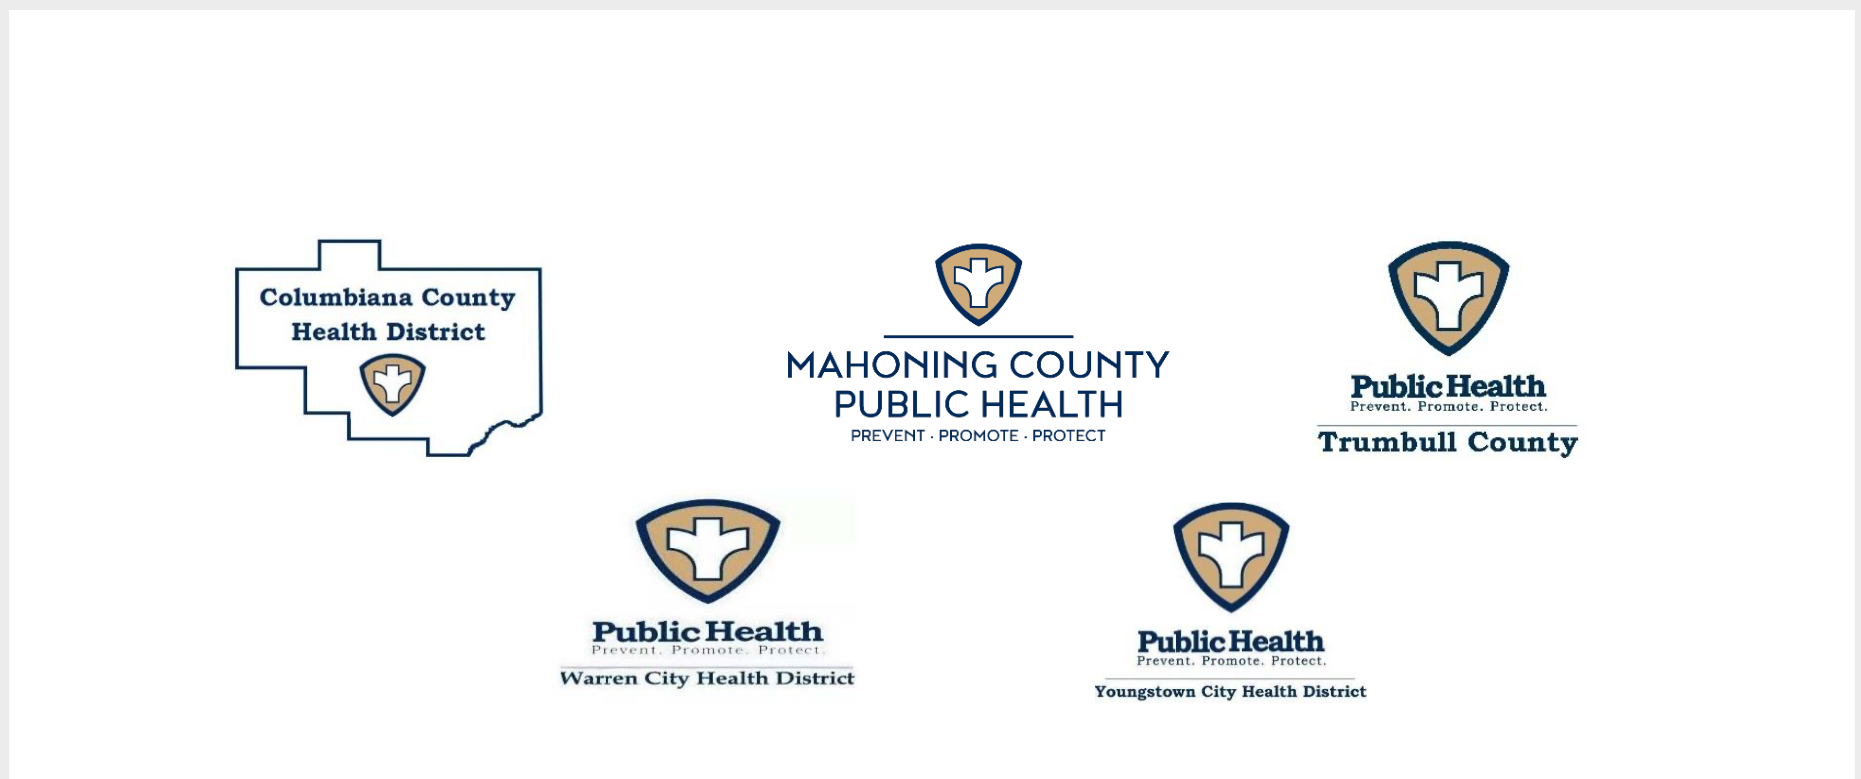 Local Public Health Departments Recommend Universal Masking in K-12 Schools